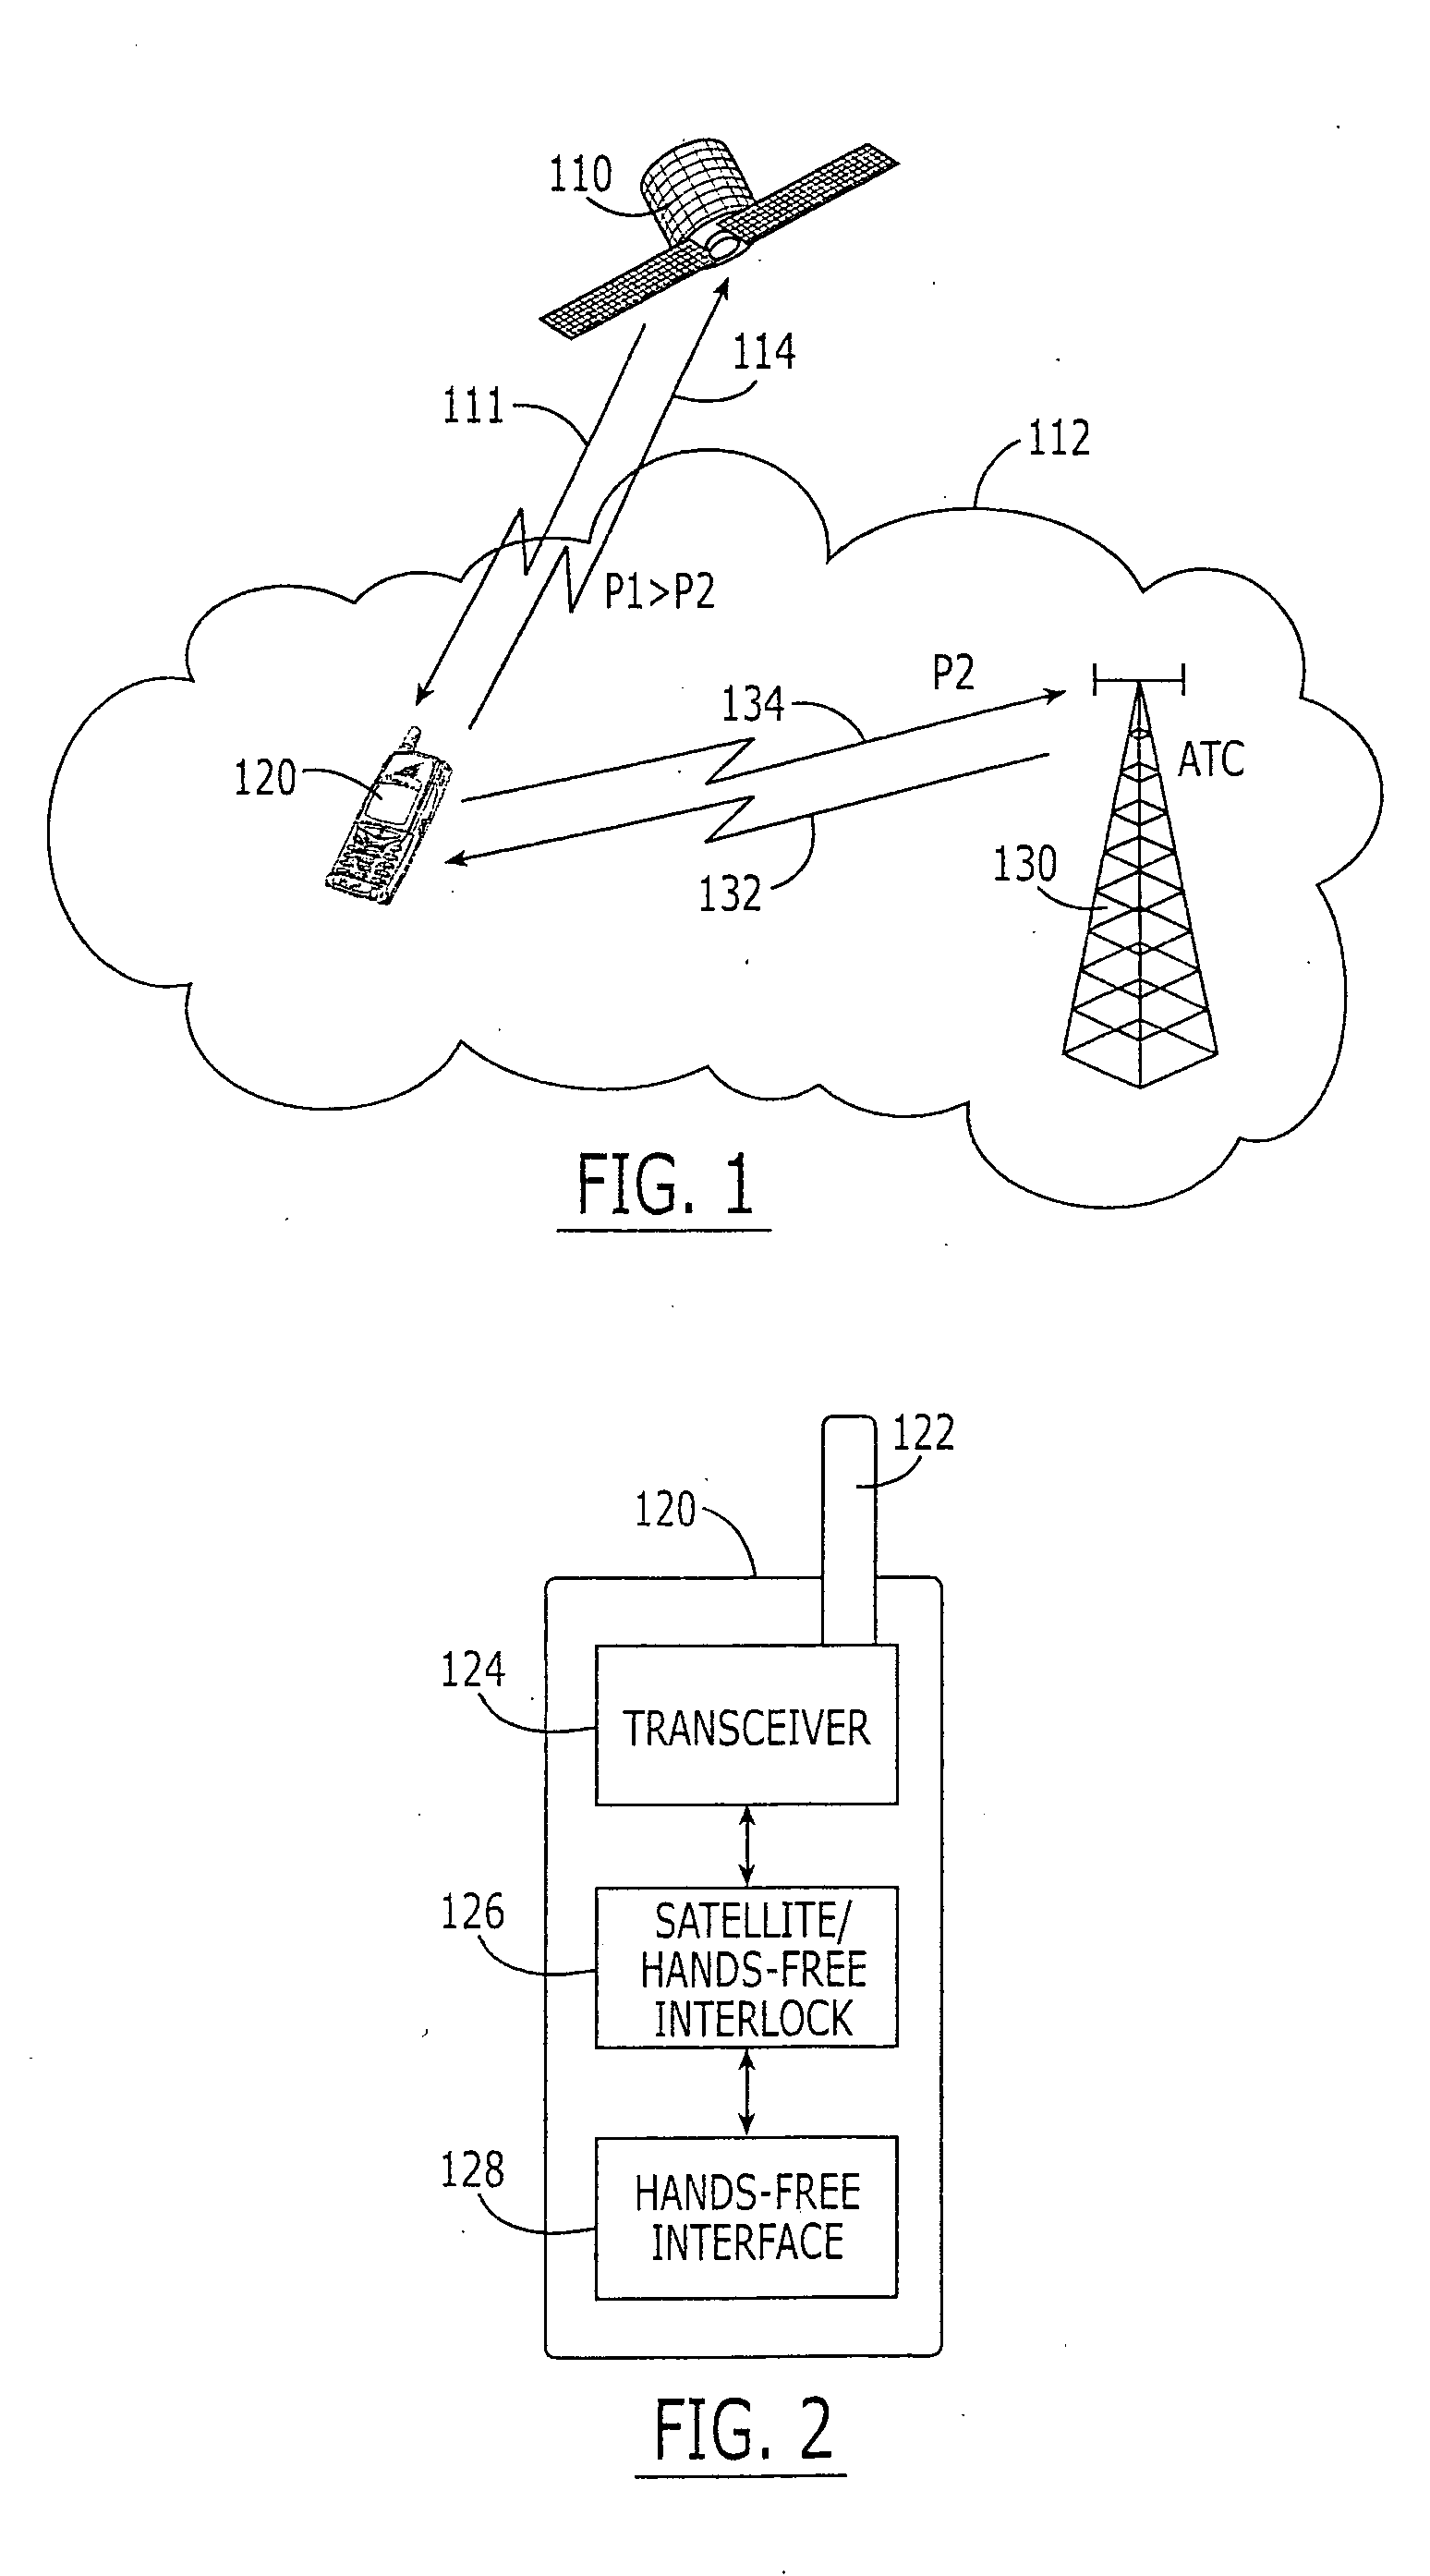 Satellite/hands-free interlock systems and/or companion devices for radioterminals and related methods